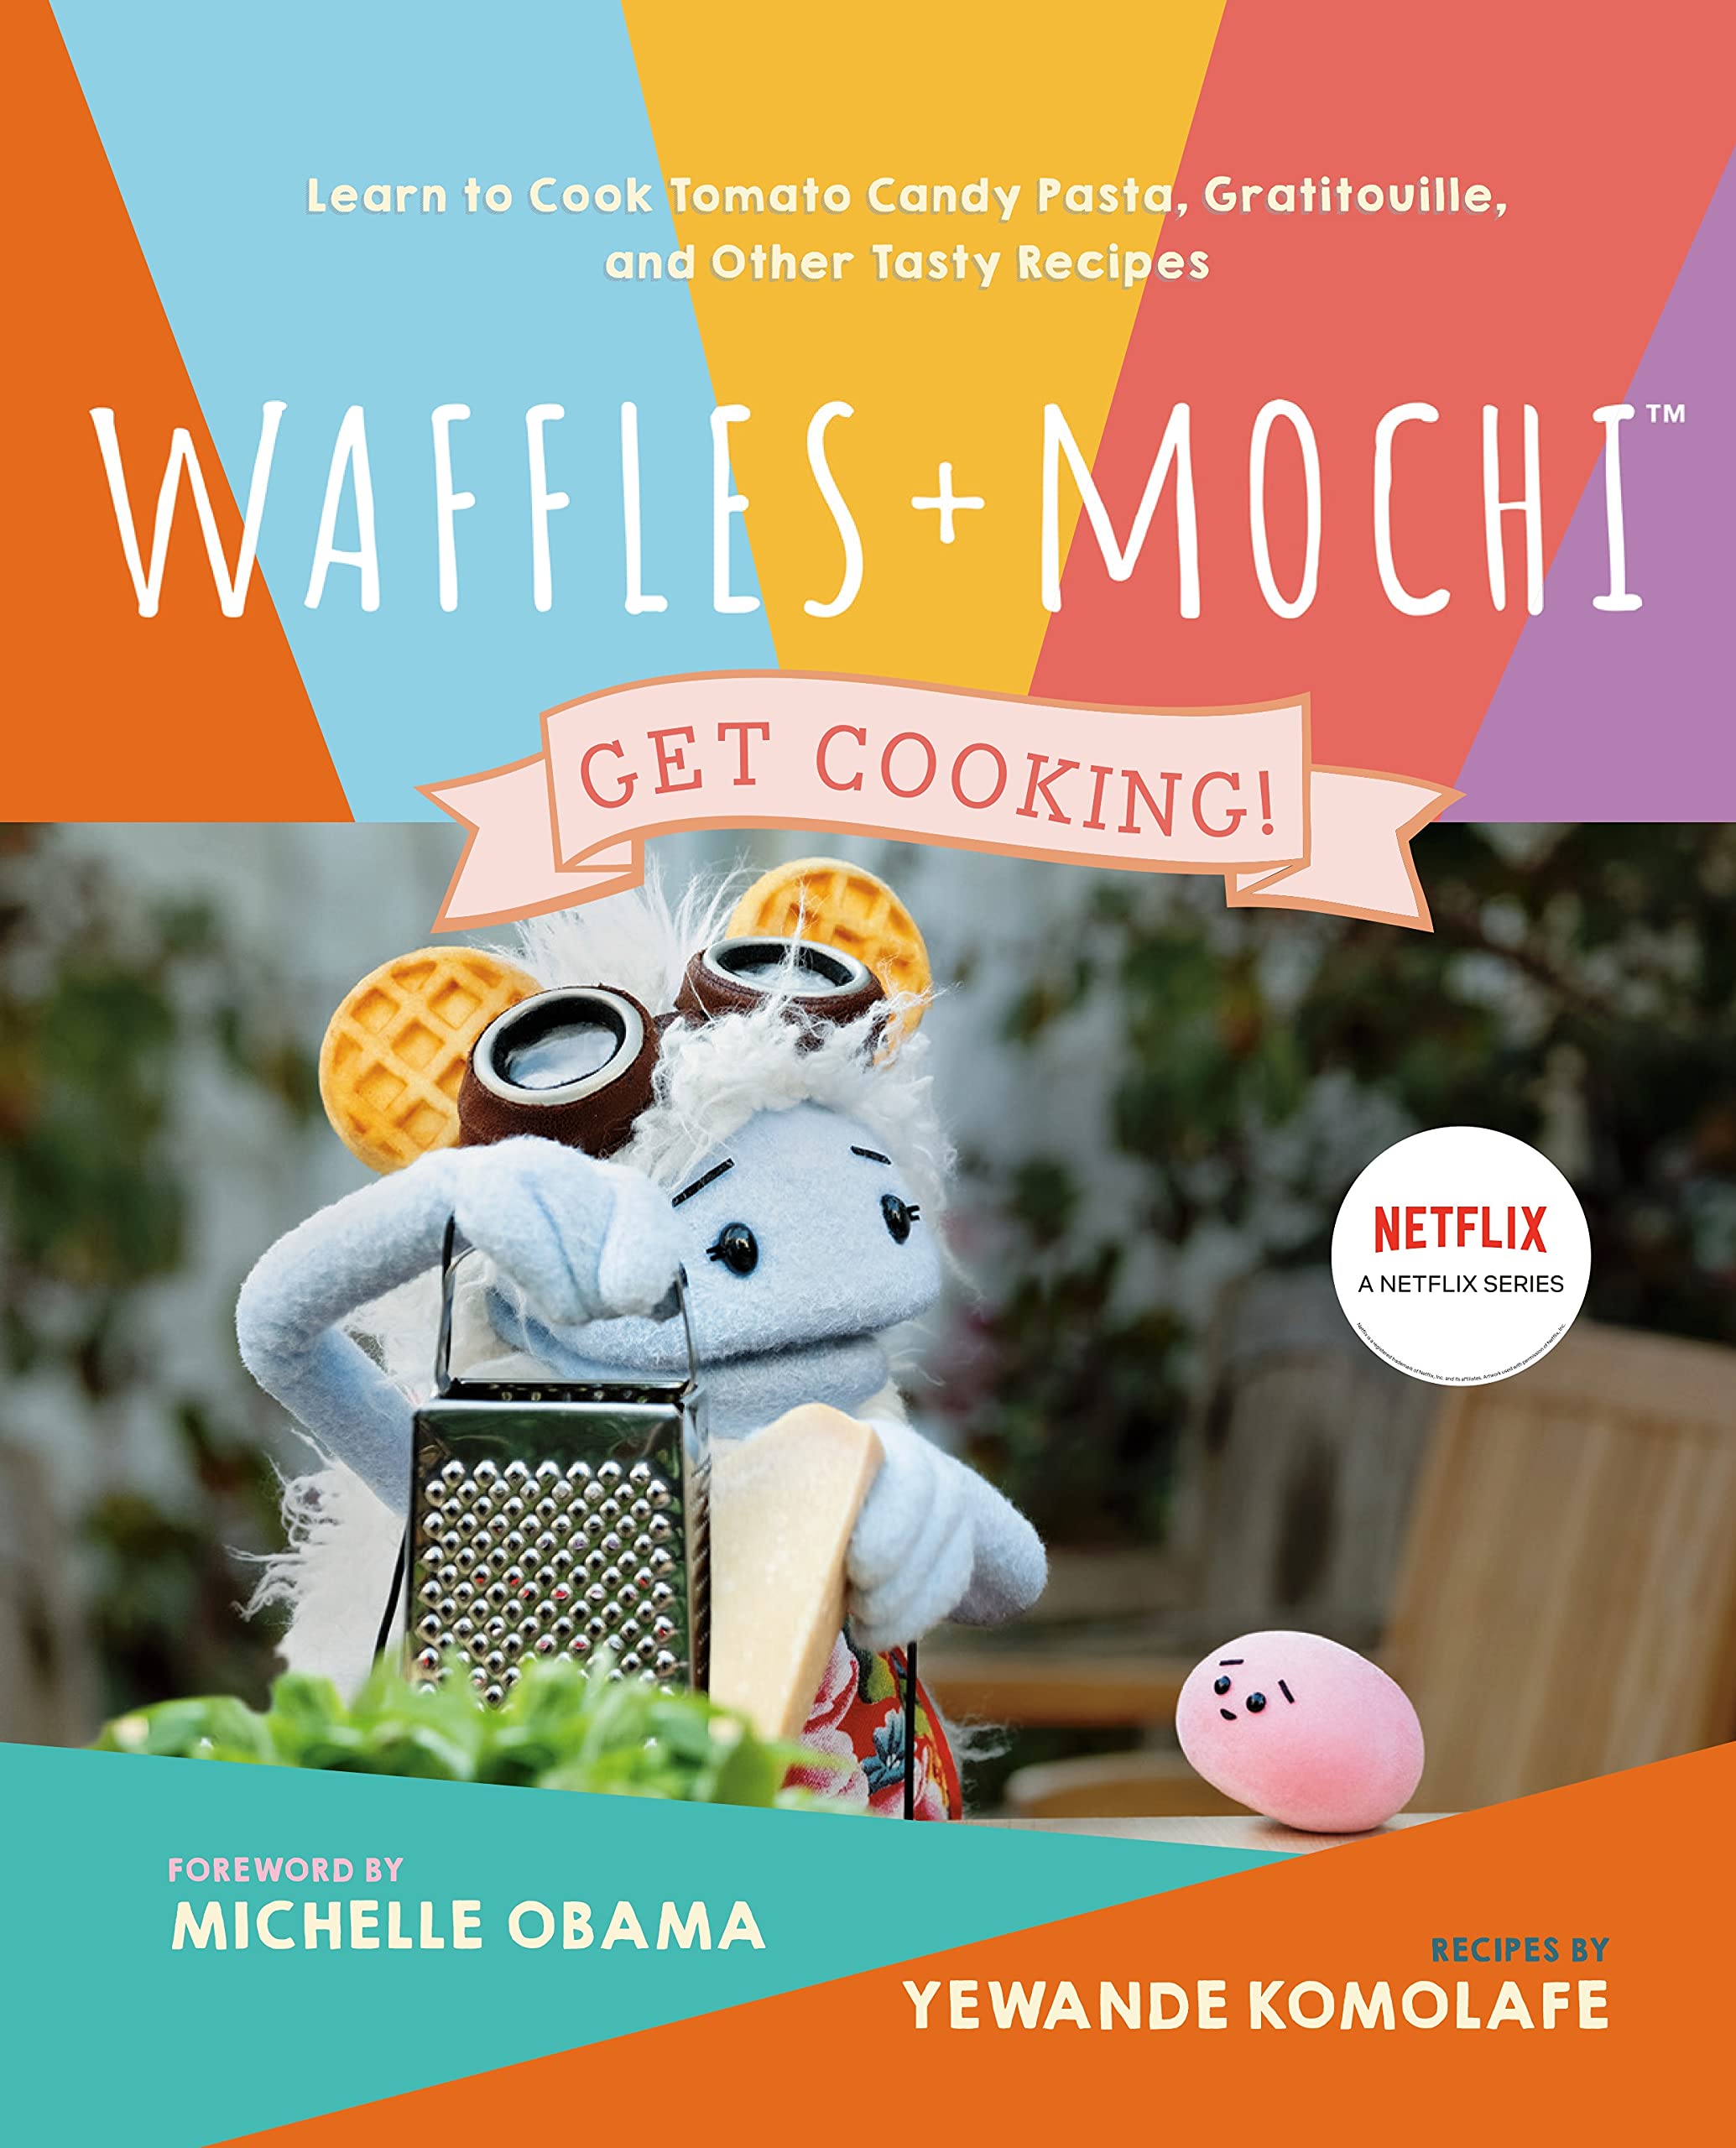 Waffles + Mochi: Get Cooking!: Learn to Cook Tomato Candy Pasta, Gratitouille, and Other Tasty Recipes (Yewande Komolafe, Michelle Obama))